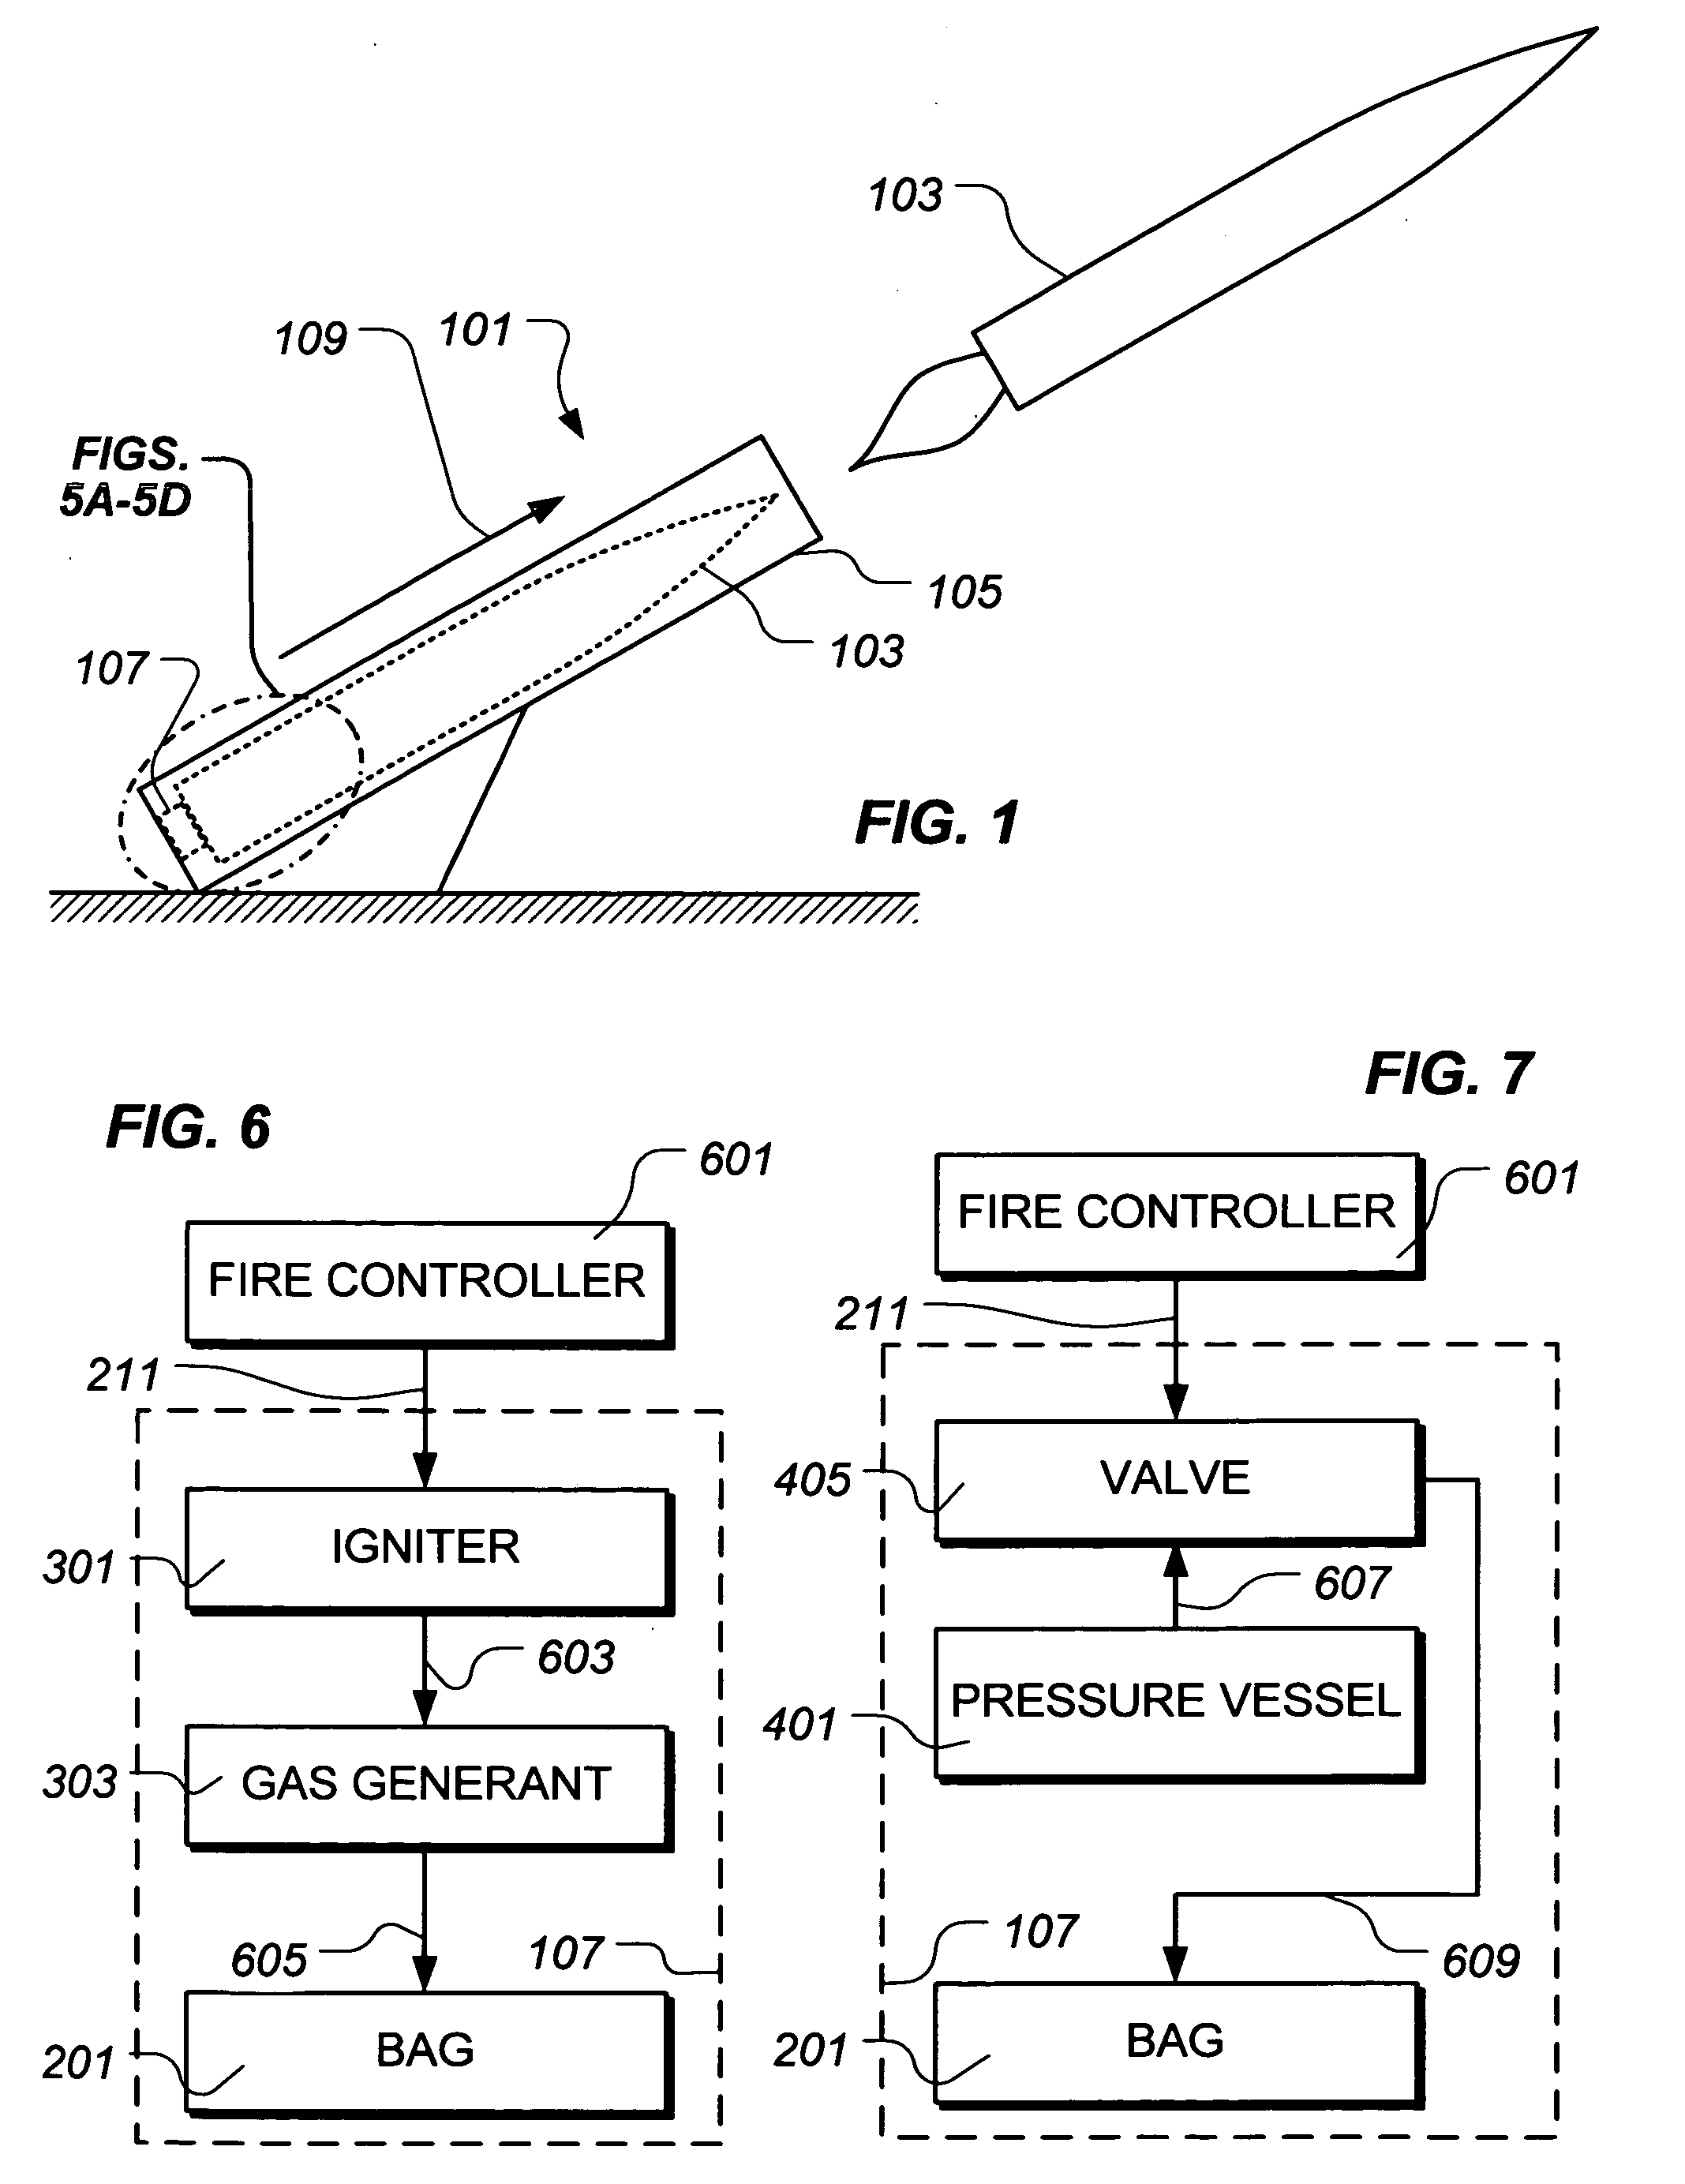 Apparatus and method for launching a vehicle